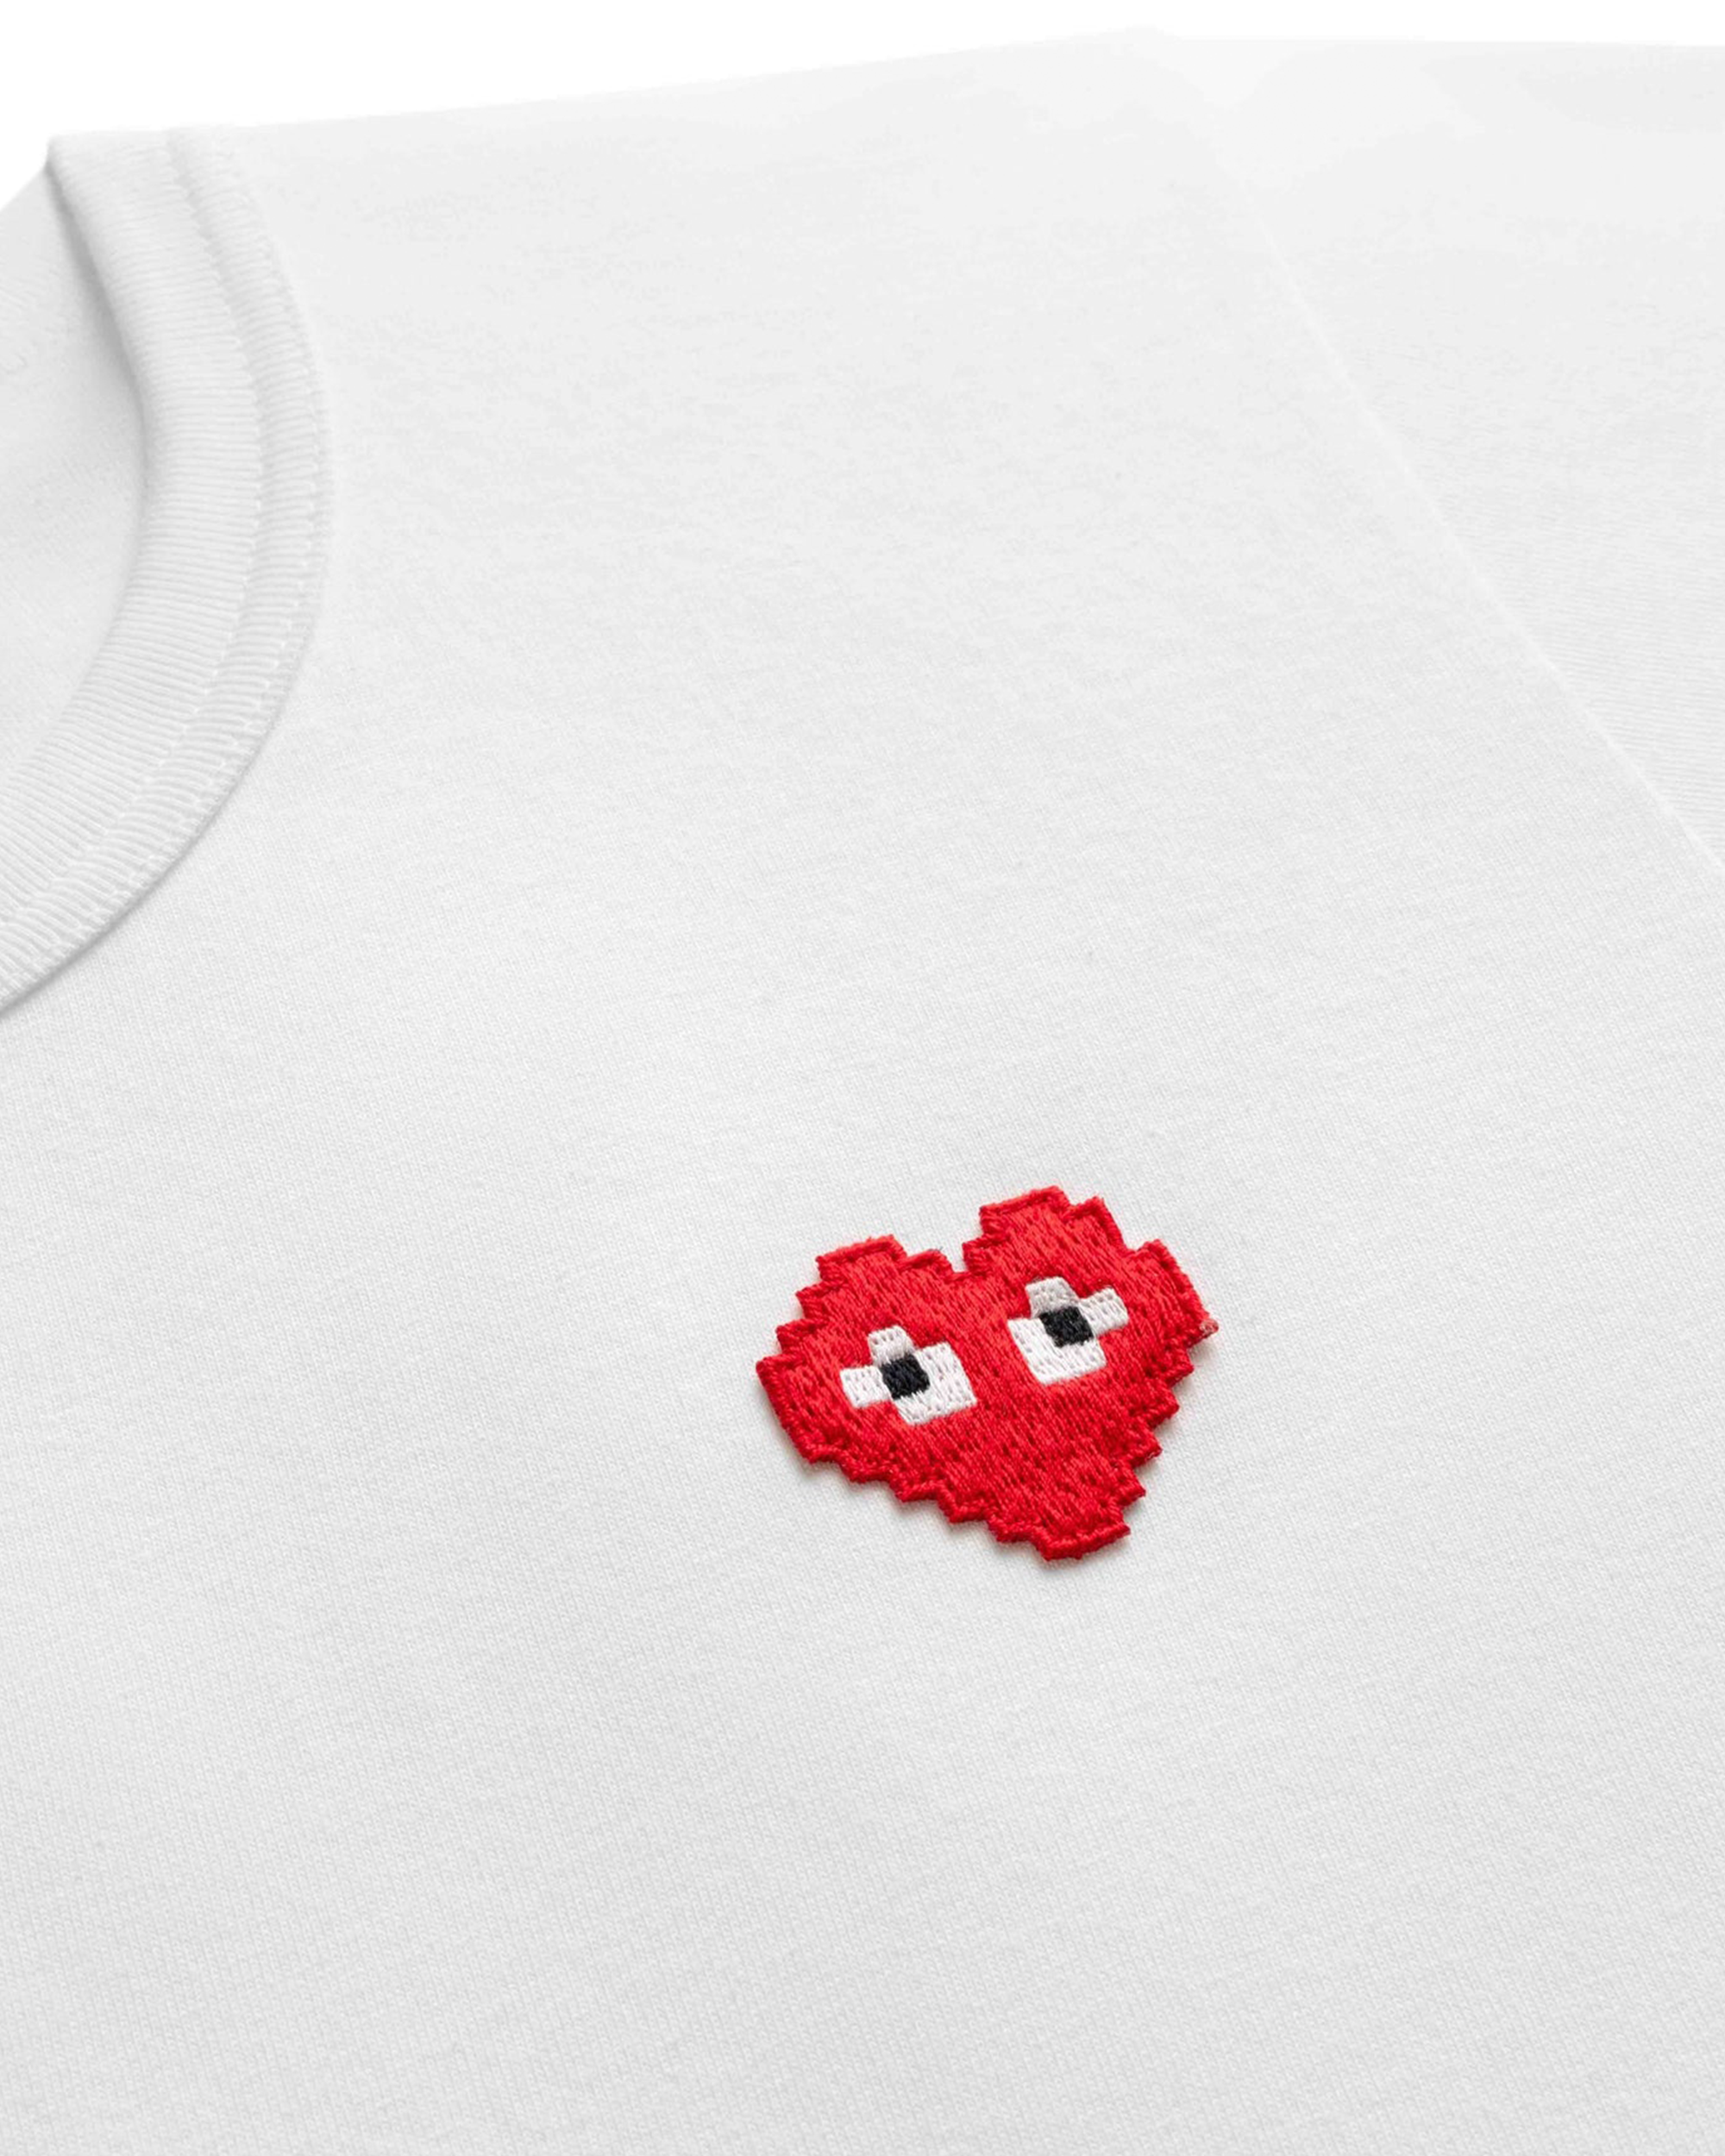 Invader Pixel Heart T-Shirt - White / Red